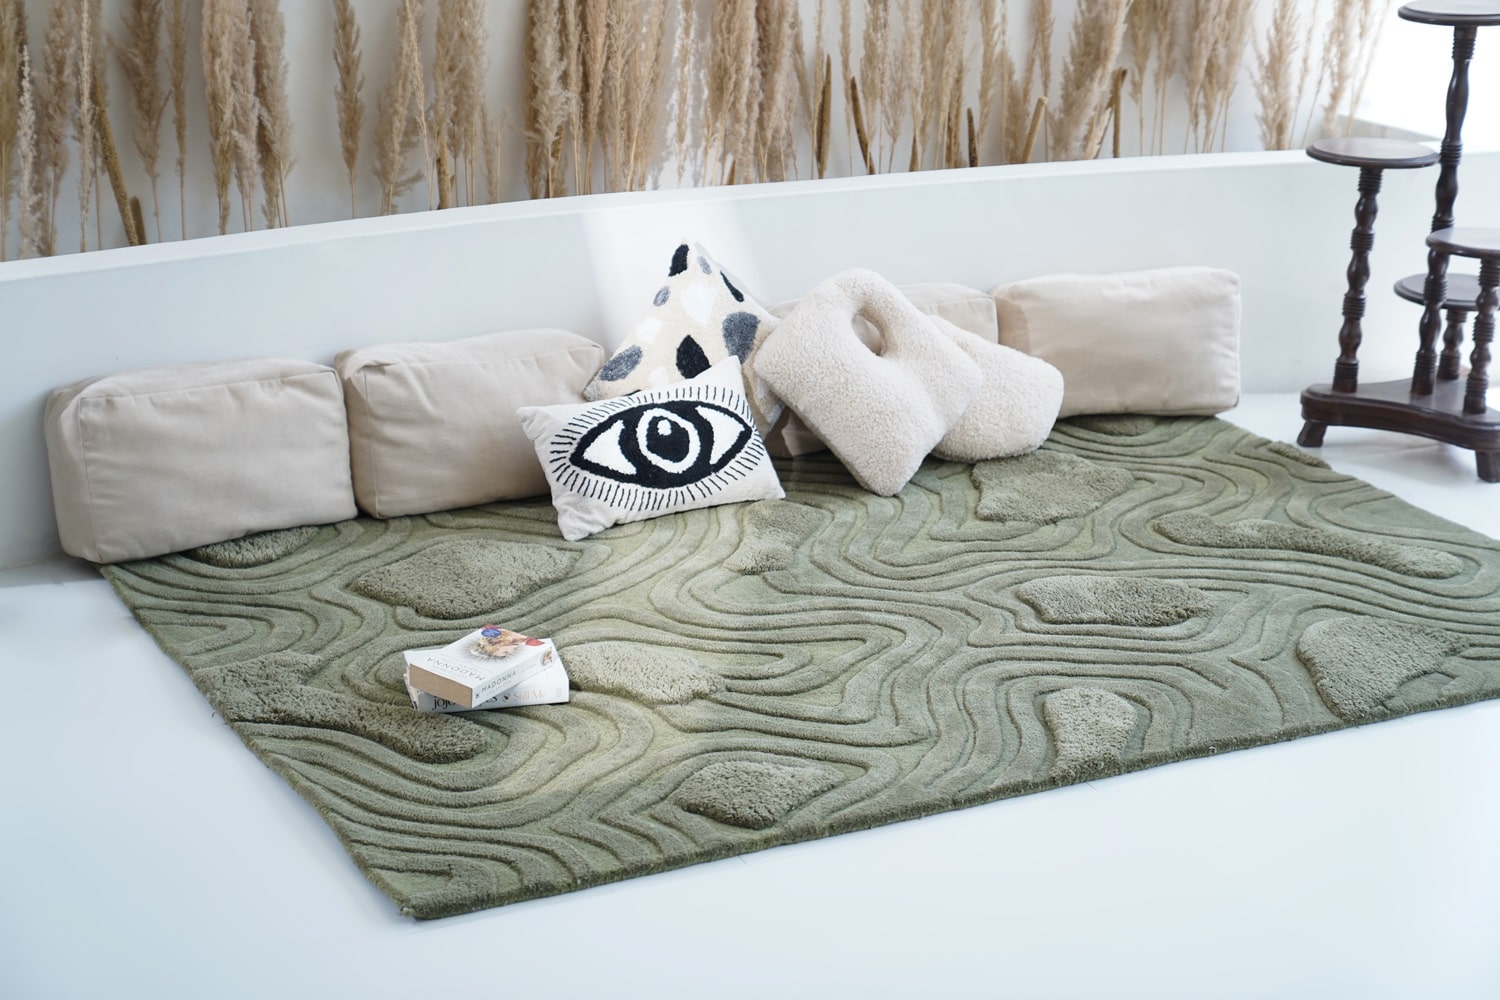 Highlands Rug styled in a room, demonstrating how it brings the tranquility and texture of highland landscapes to home decor.